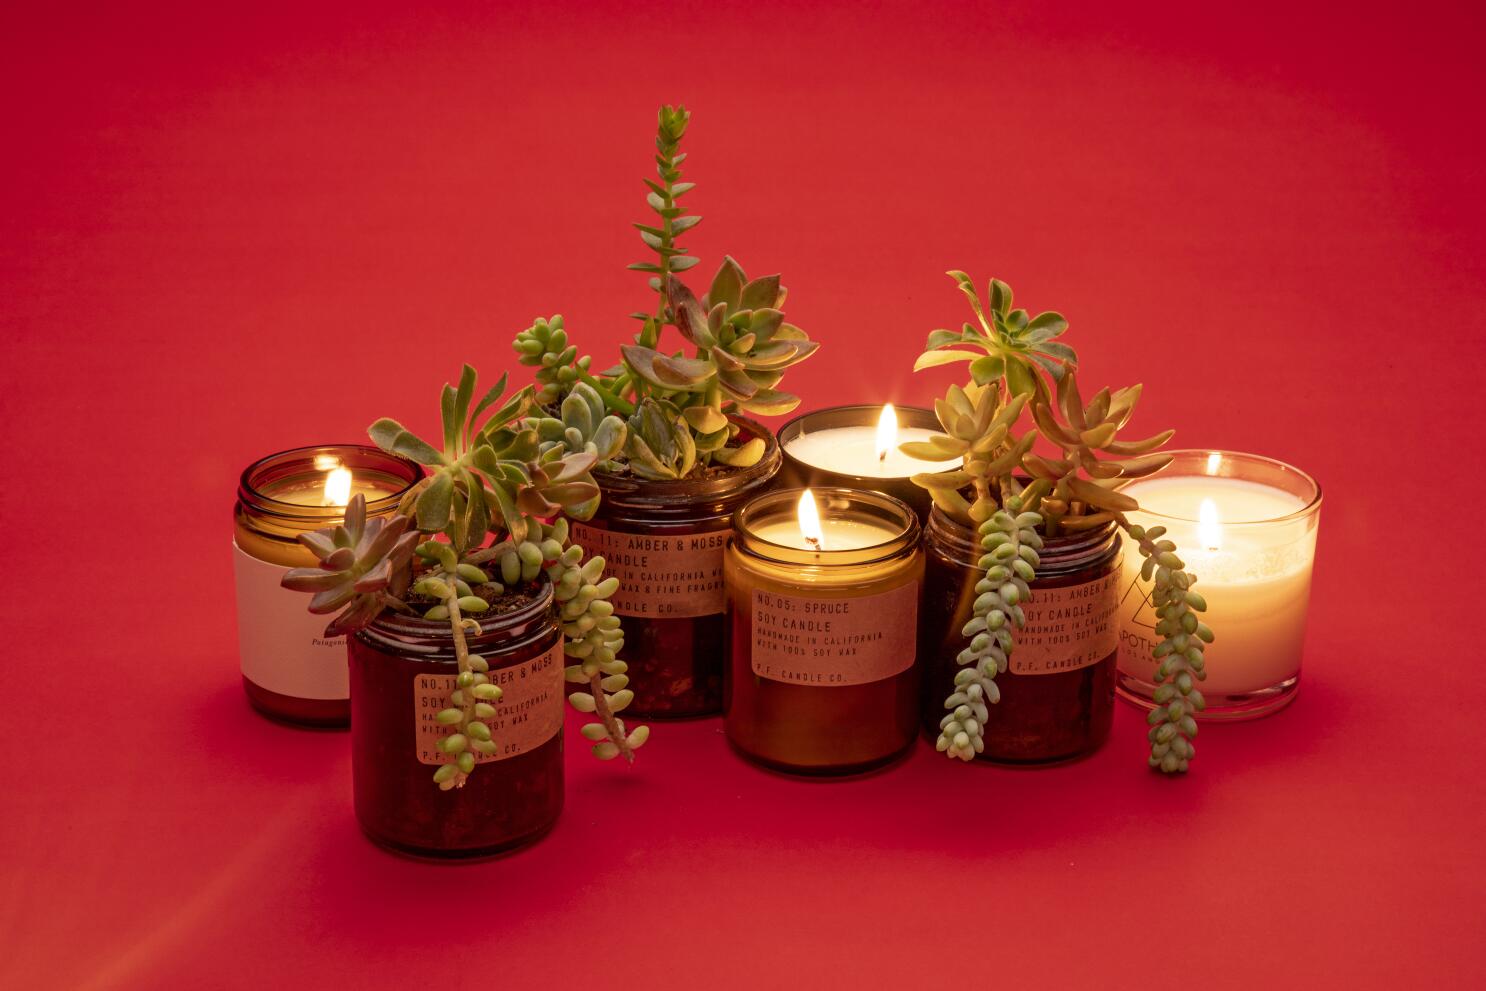 TUESDAY, DEC 12 - DIY SOY CANDLE MAKING WORKSHOP WITH ESSENTIAL